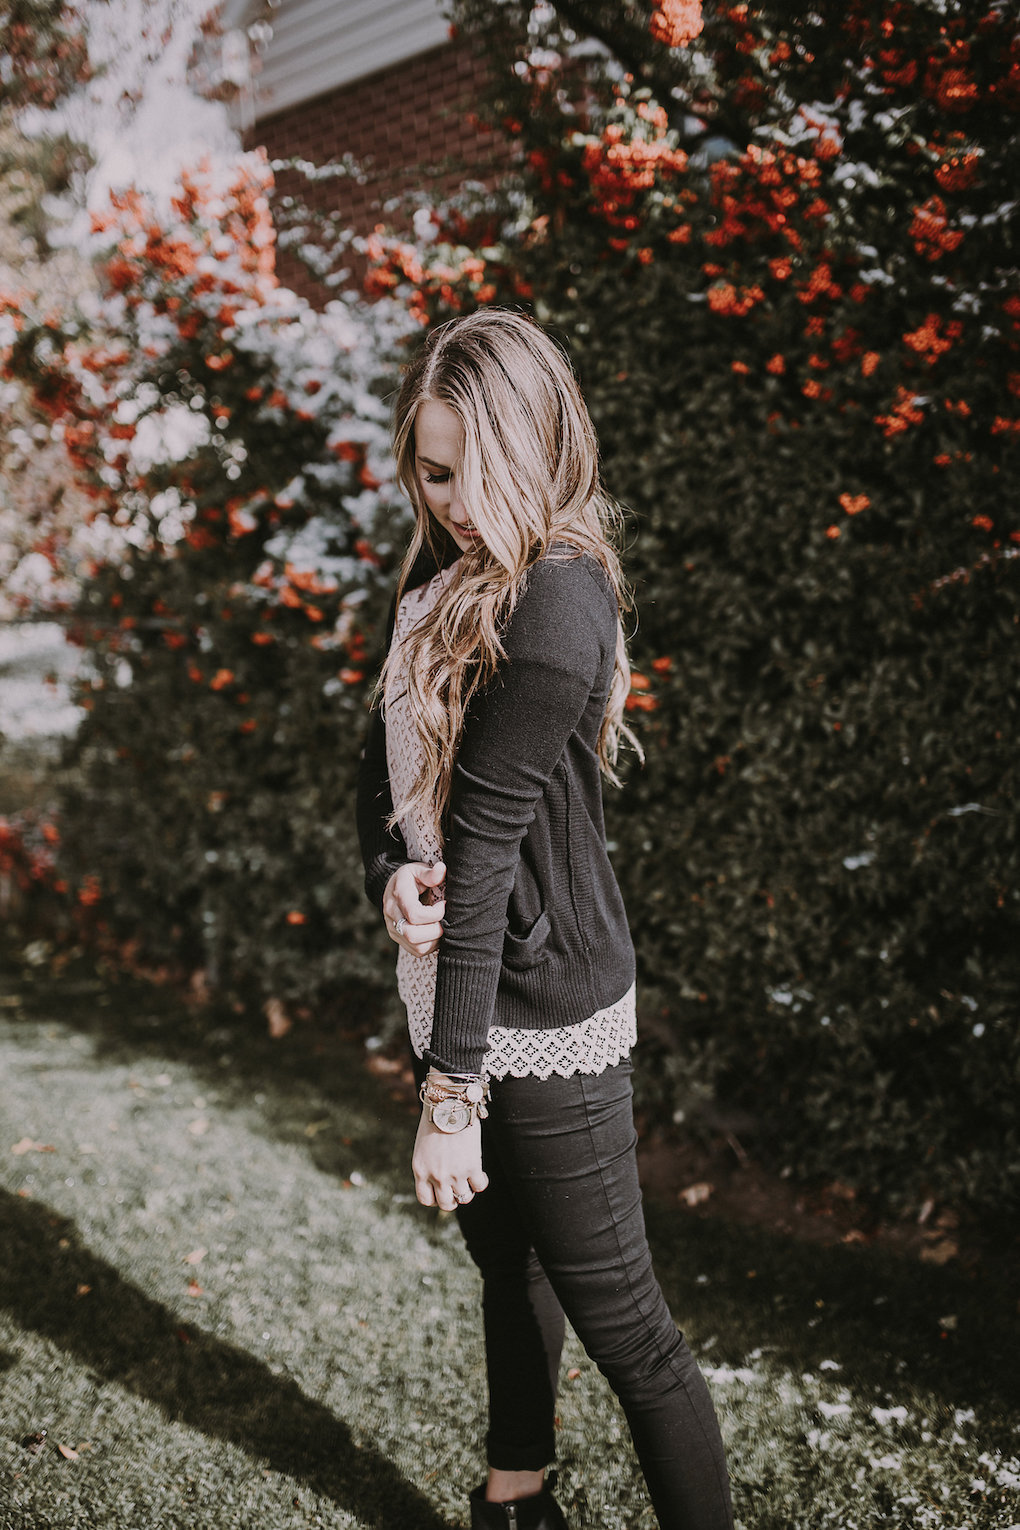 girl standing in front of berry bush wearing a light pink lace top with a black cardigan and black distressed jeans and blck booties with brown loosely curled hair